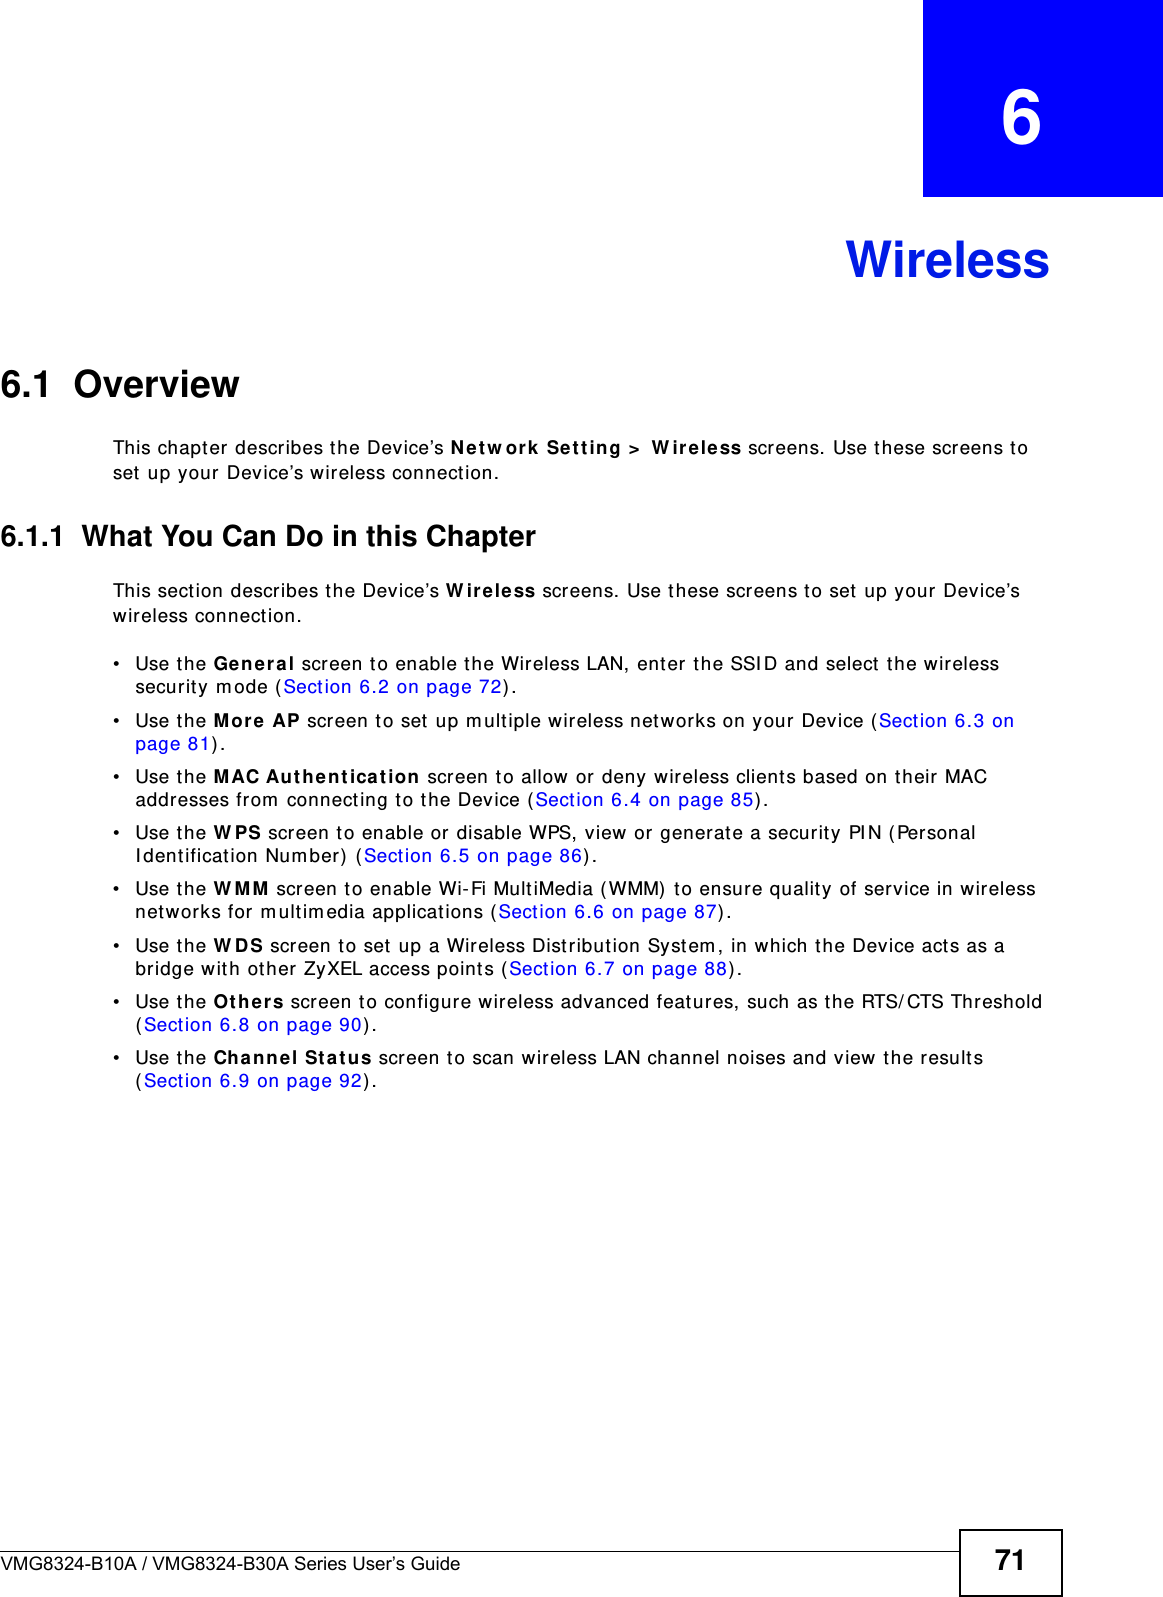 VMG8324-B10A / VMG8324-B30A Series User’s Guide 71CHAPTER   6Wireless6.1  Overview This chapt er describes t he Device’s N e t w or k Se t t ing &gt;  W ire le ss scr eens. Use these screens t o set up your Device’s wireless connect ion.6.1.1  What You Can Do in this ChapterThis sect ion describes t he Device’s W ir e less screens. Use t hese screens t o set  up your  Device’s wireless connection.• Use the Ge n e r a l screen to enable t he Wireless LAN, enter t he SSI D and select  t he wireless security m ode (Sect ion 6.2 on page 72) .• Use the M ore  AP screen t o set  up m ult iple wireless net works on your Device (Sect ion 6.3 on page 81) .• Use the M AC Aut hent icat ion screen t o allow or deny wireless clients based on t heir MAC addresses from  connect ing t o t he Device ( Sect ion 6.4 on page 85) .• Use the W PS screen t o enable or disable WPS, view or generate a security PI N (Personal I dent ificat ion Num ber )  ( Sect ion 6.5 on page 86) .• Use the W M M  screen to enable Wi- Fi MultiMedia ( WMM)  t o ensure qualit y of service in wireless net works for m ult im edia applicat ions (Sect ion 6.6 on page 87) . • Use the W D S screen to set  up a Wireless Dist ribut ion Syst em , in which t he Device act s as a bridge wit h other ZyXEL access point s (Sect ion 6.7 on page 88) .• Use the Ot hers screen to configure wireless advanced feat ures, such as t he RTS/ CTS Threshold (Sect ion 6.8 on page 90) .• Use the Cha nnel Sta t us screen to scan wireless LAN channel noises and view t he result s (Sect ion 6.9 on page 92) .